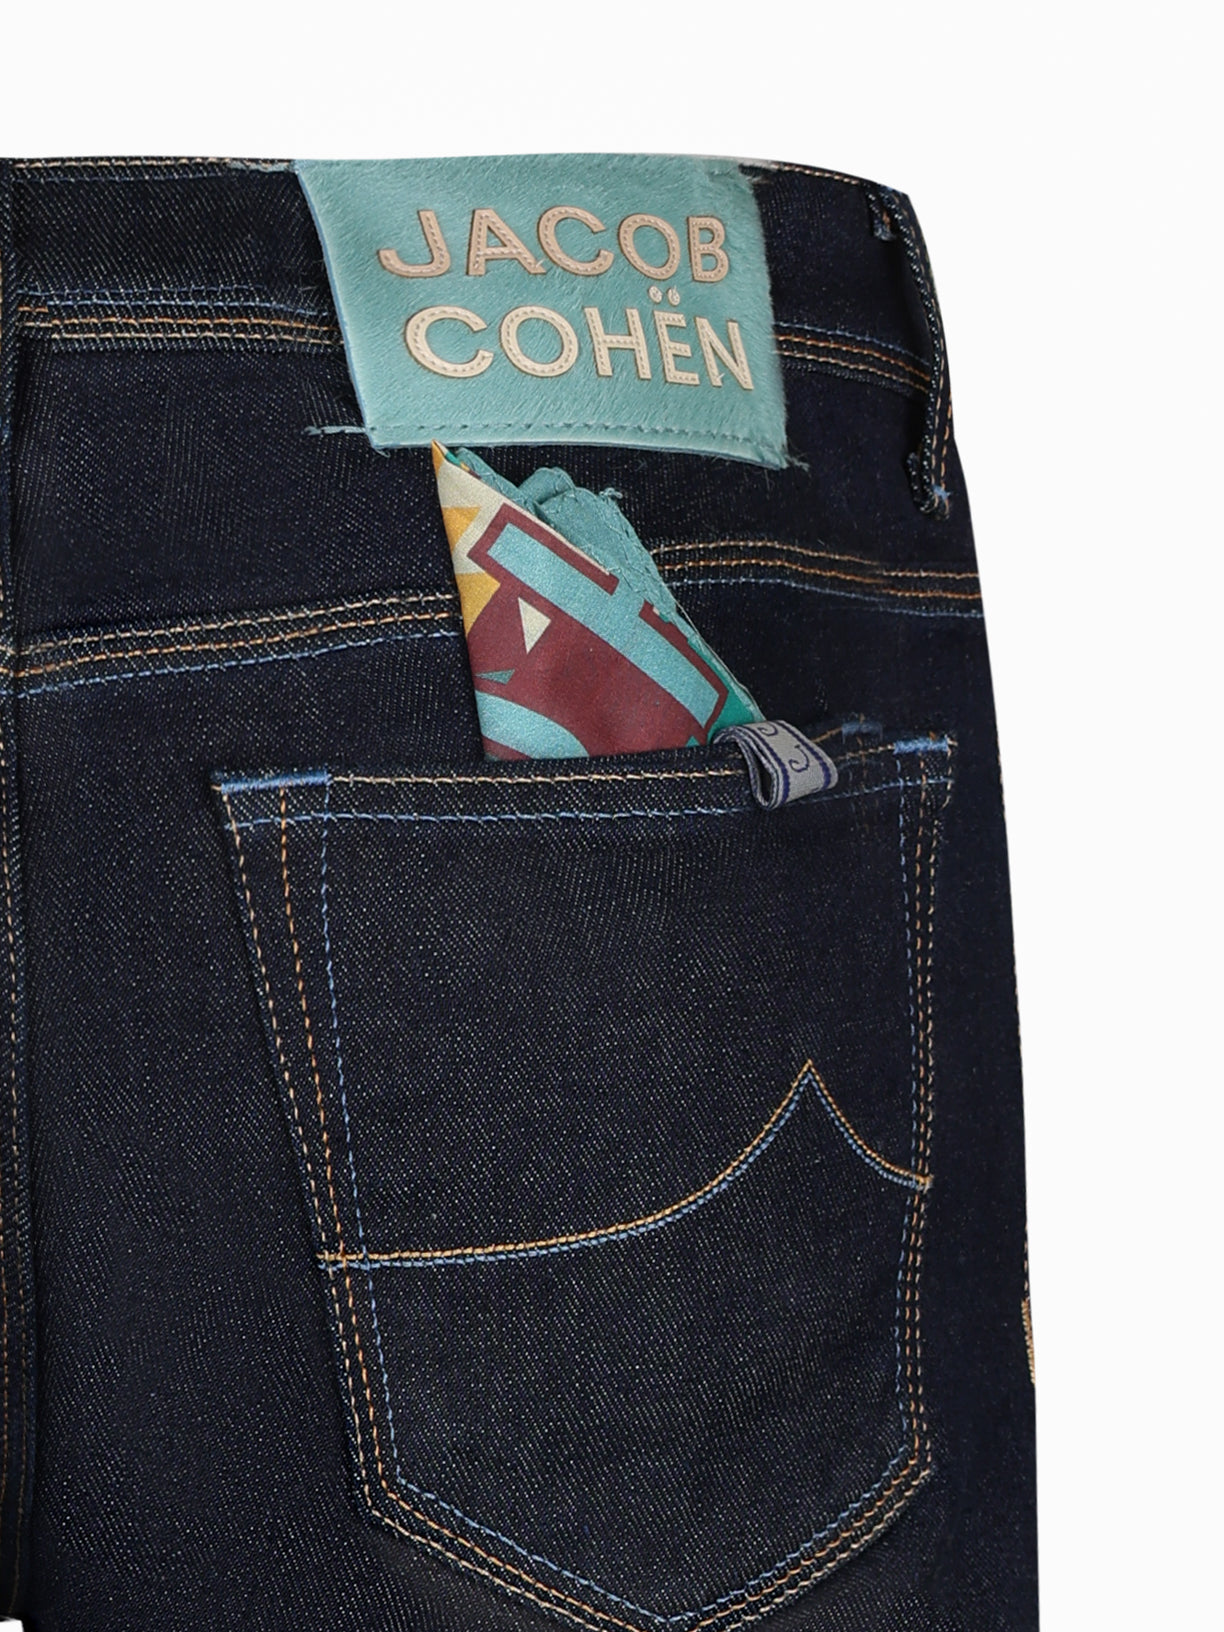 Load image into Gallery viewer, Jacob Cohen Bard Dark Jean Sky Badge
